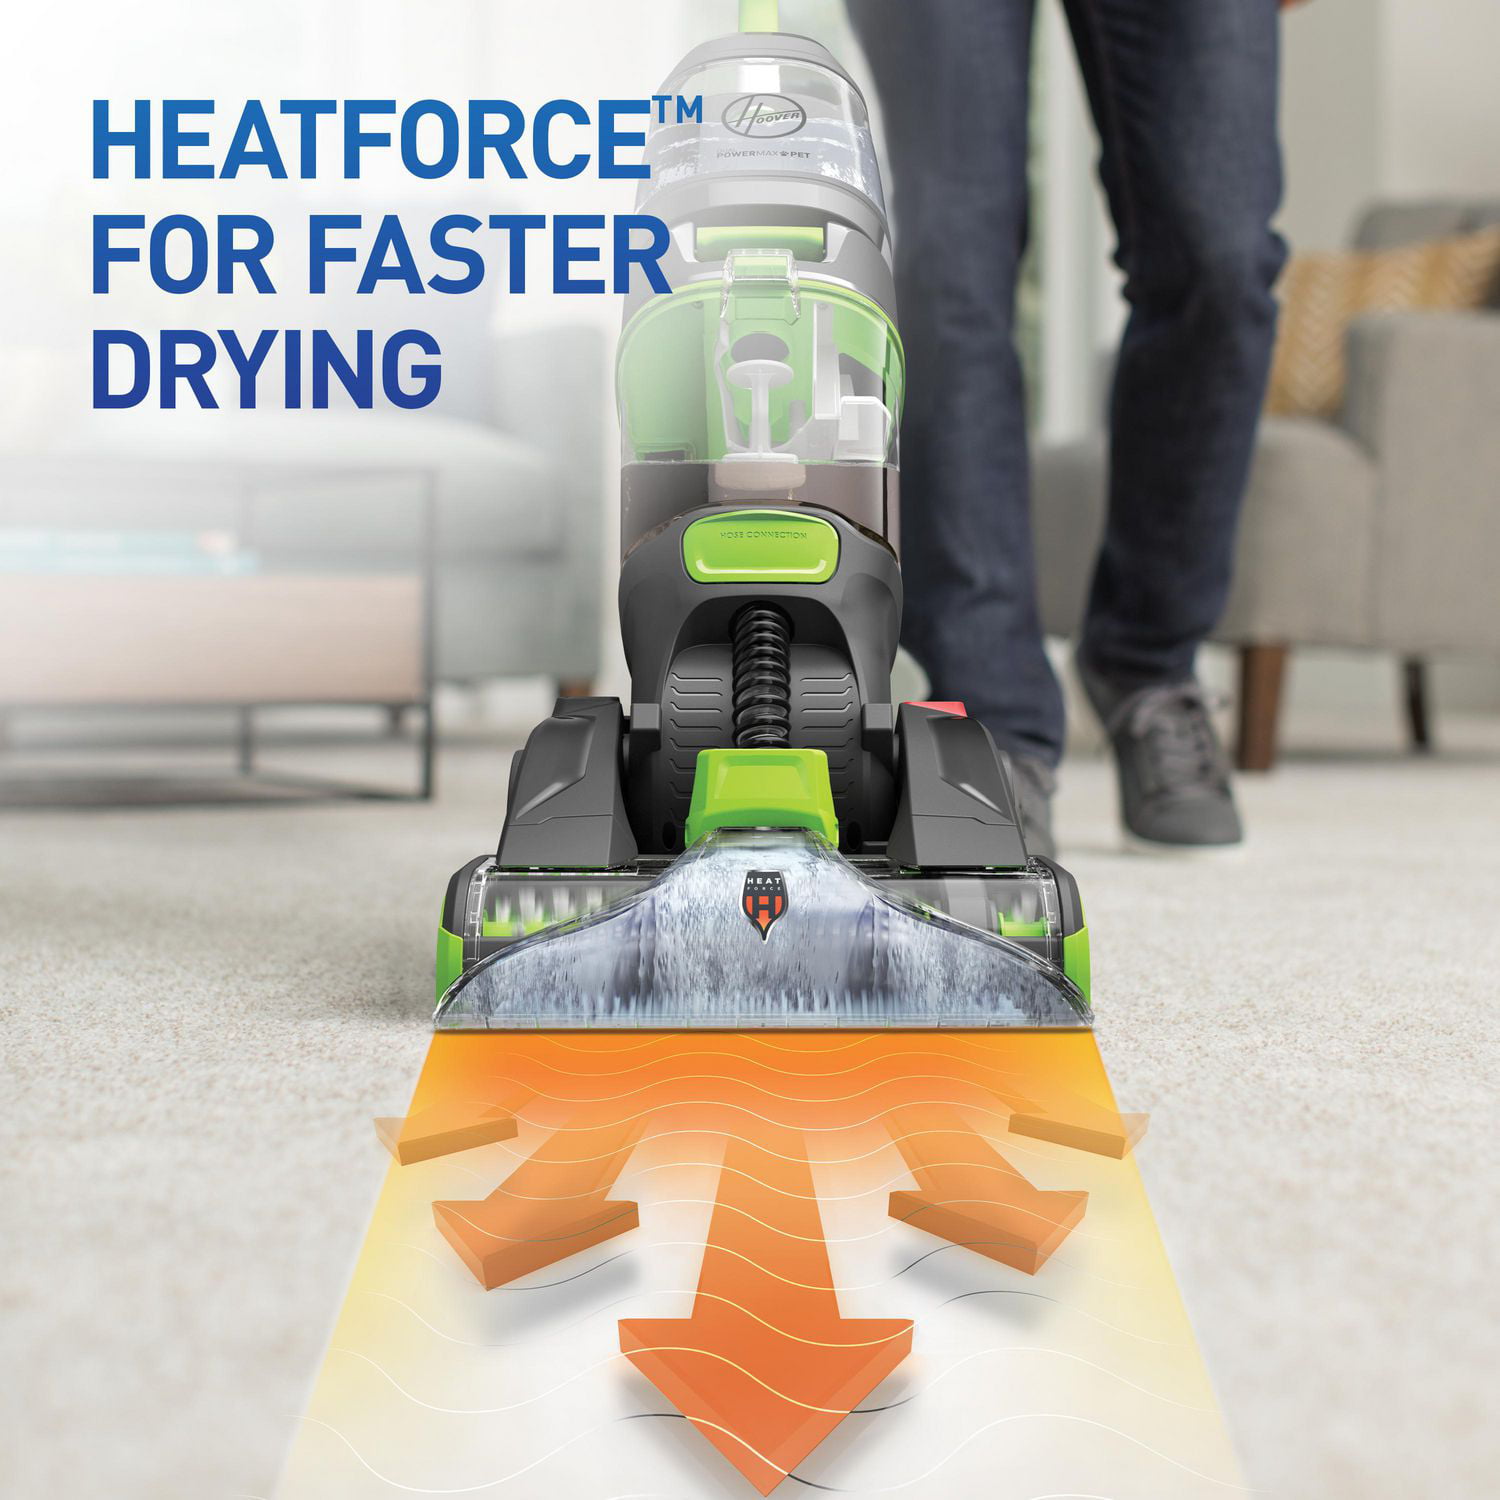 cleaning - How do I remove stuck (melted?) foam from under carpet on  hardwood floor? - Home Improvement Stack Exchange